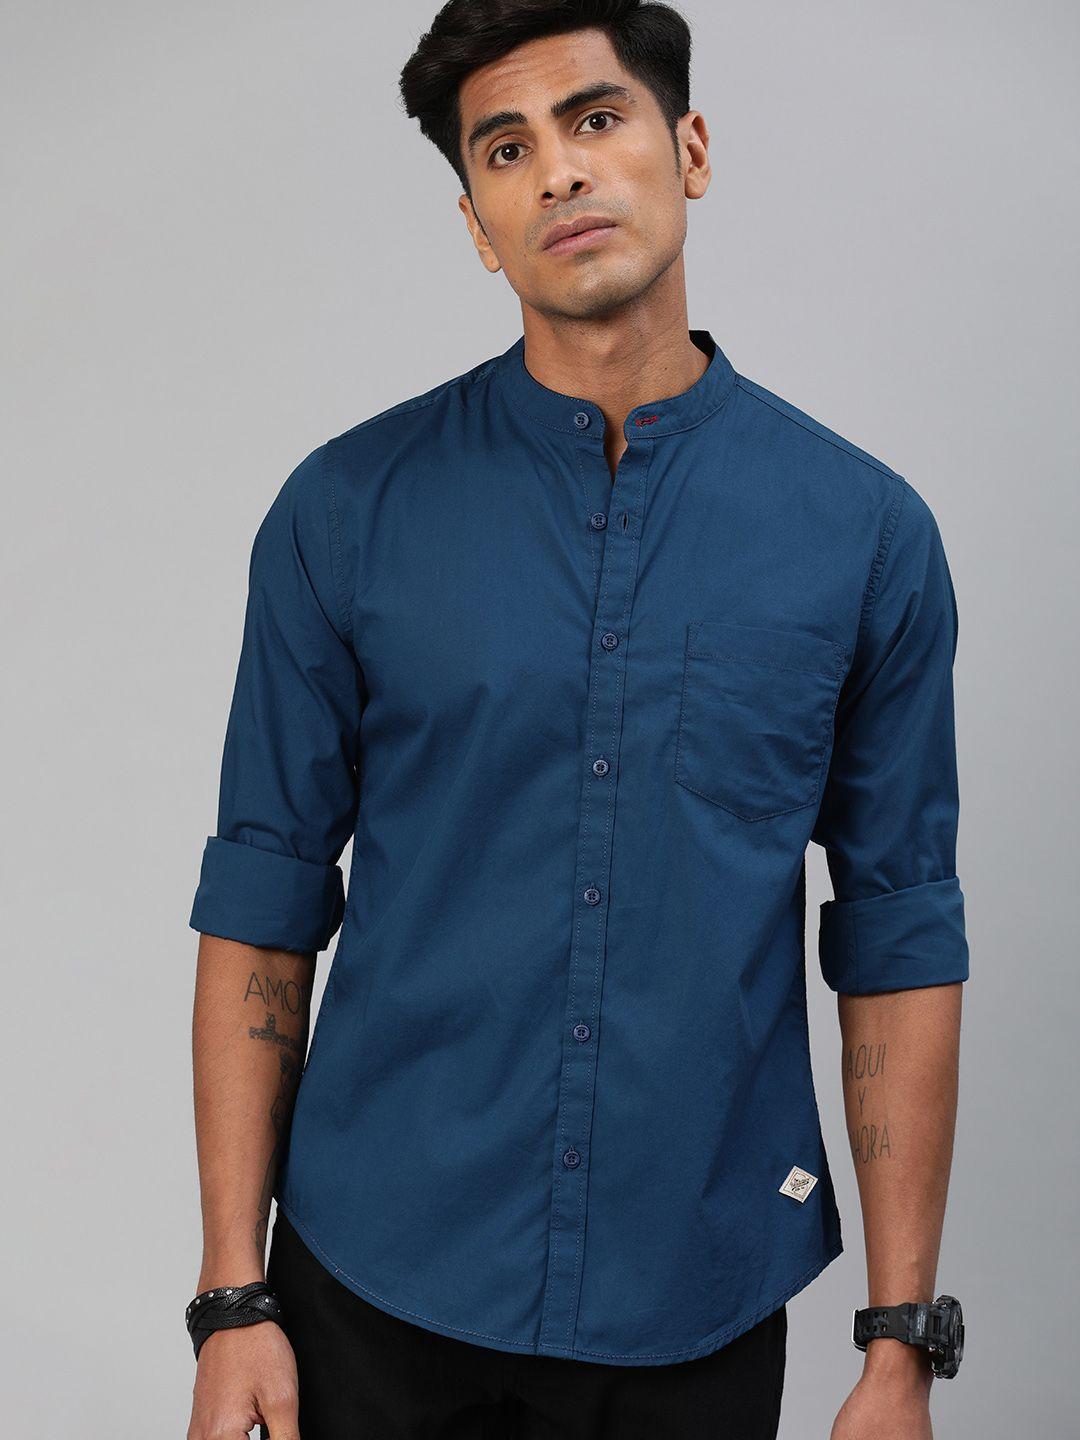 roadster-men-blue-regular-fit-solid-sustainable-casual-shirt